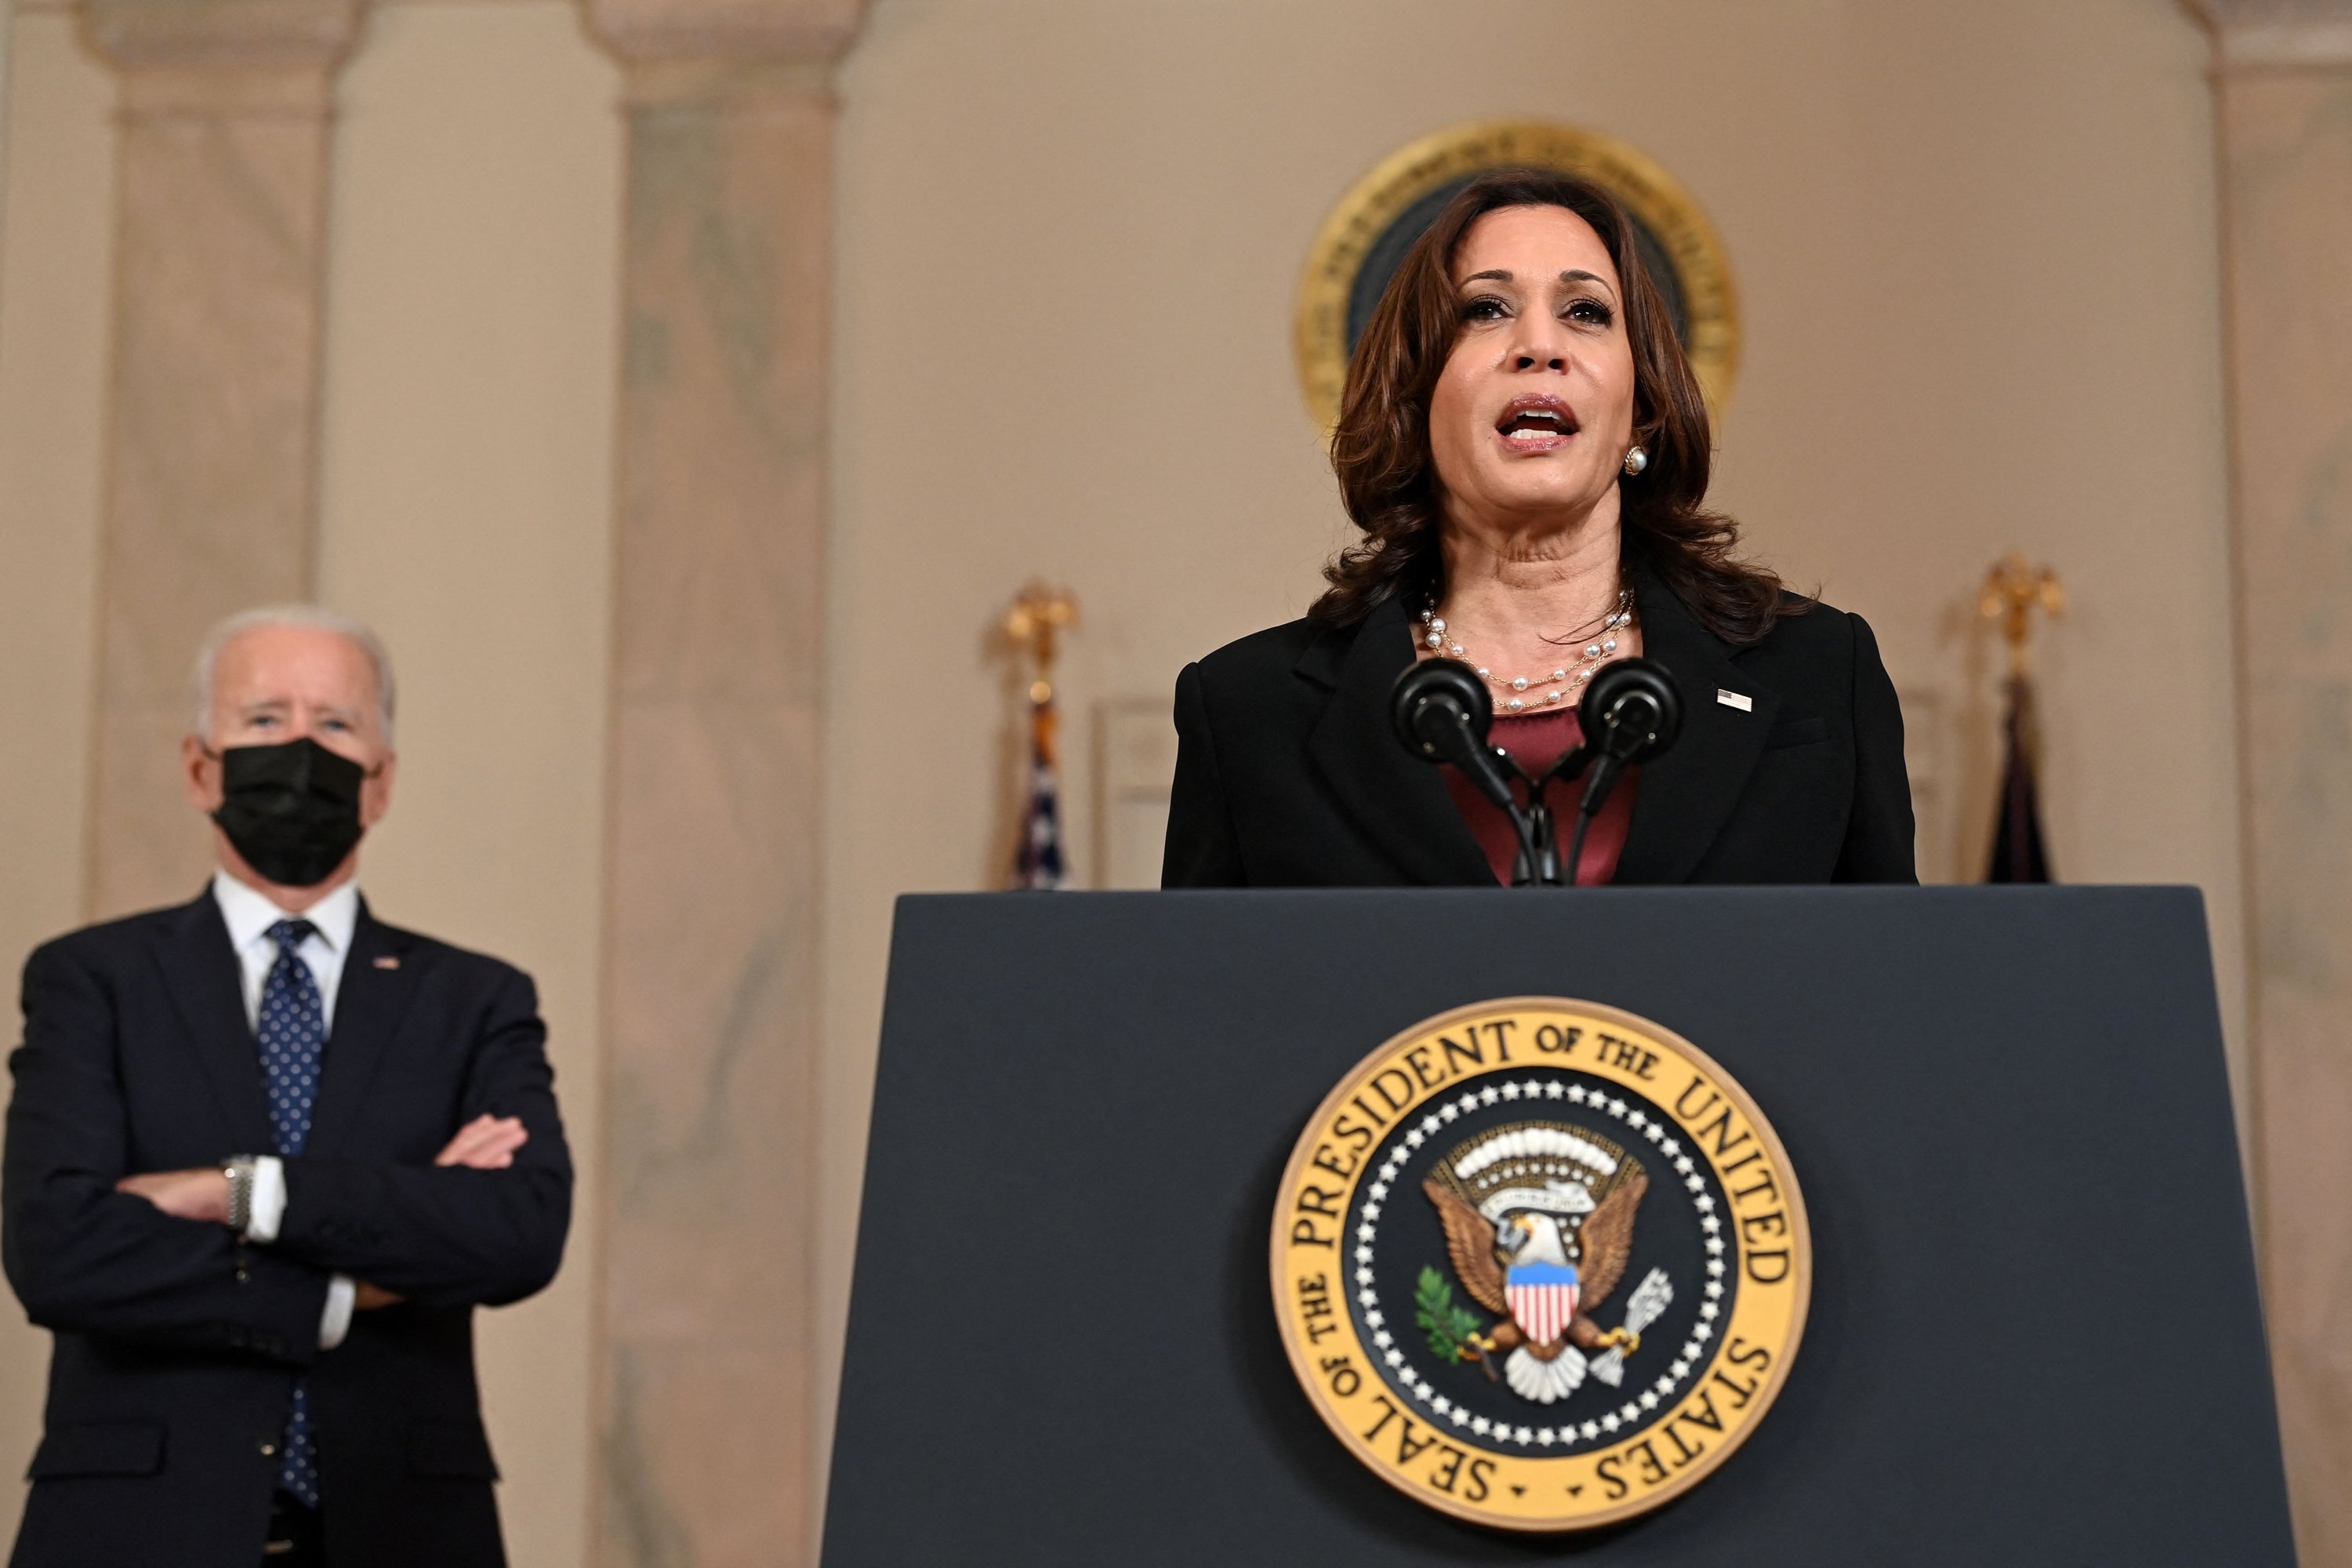 U.S. President Joe Biden (L) listens as Vice President Kamala Harris delivers remarks on the guilty verdict against former police officer Derek Chauvin at the White House in Washington, D.C., U.S., April 20, 2021. (AFP Photo)